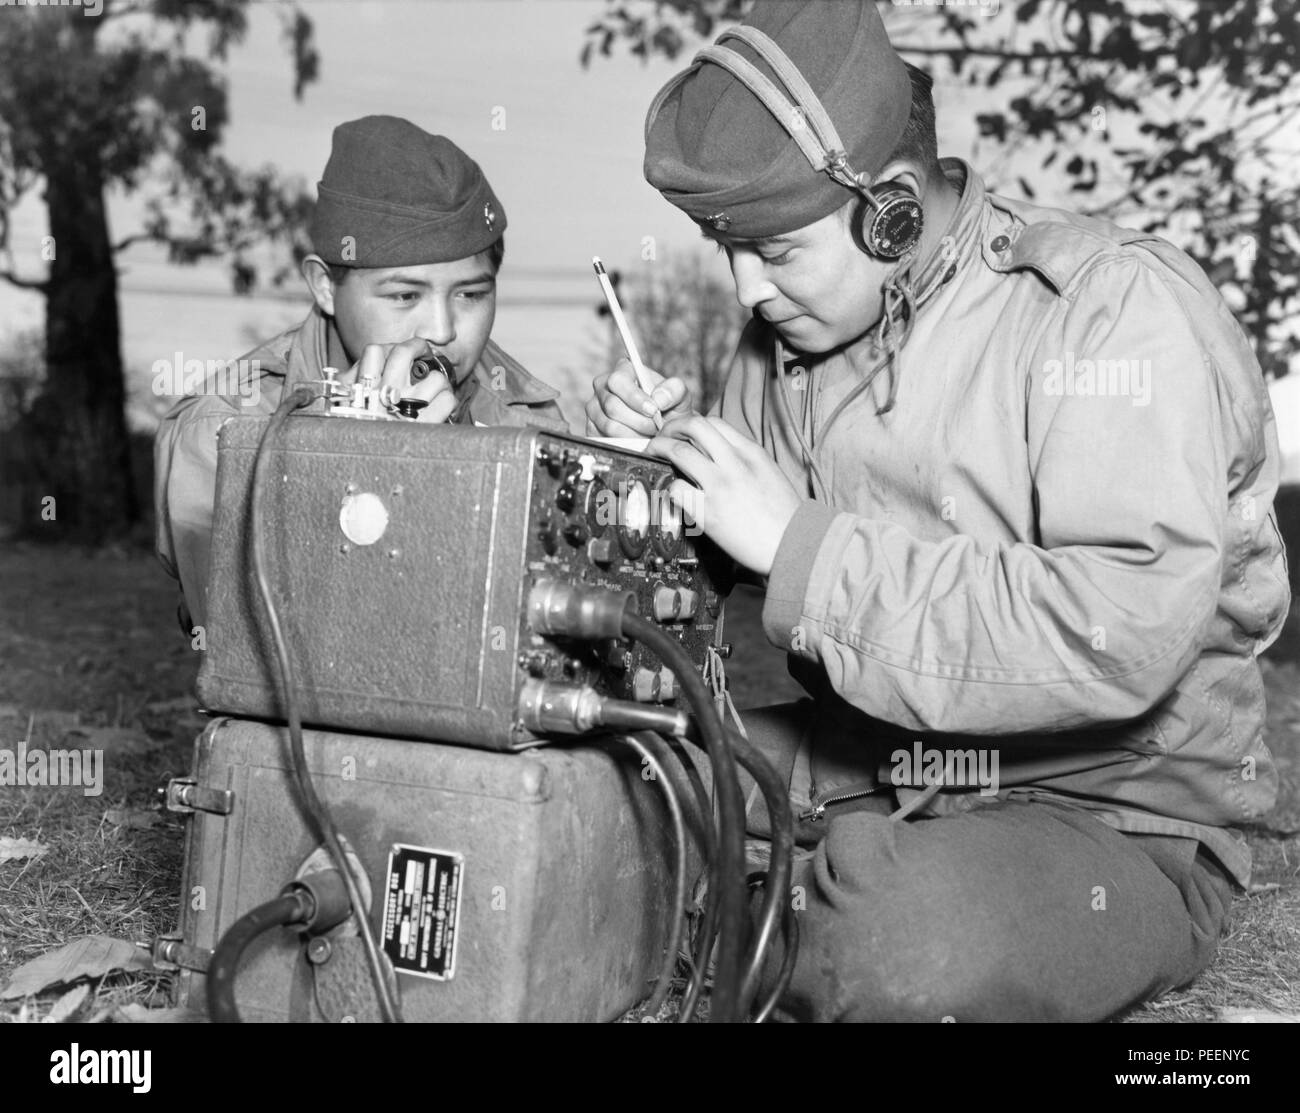 Navajo code talkers, cousins PFC Preston Toledo and PFC Frank Toledo, attached to a Marine Artillery Regiment in the South Pacific during World War II, use a field radio to transmit orders in their native Navajo tongue. Photo: July 7, 1943. Stock Photo